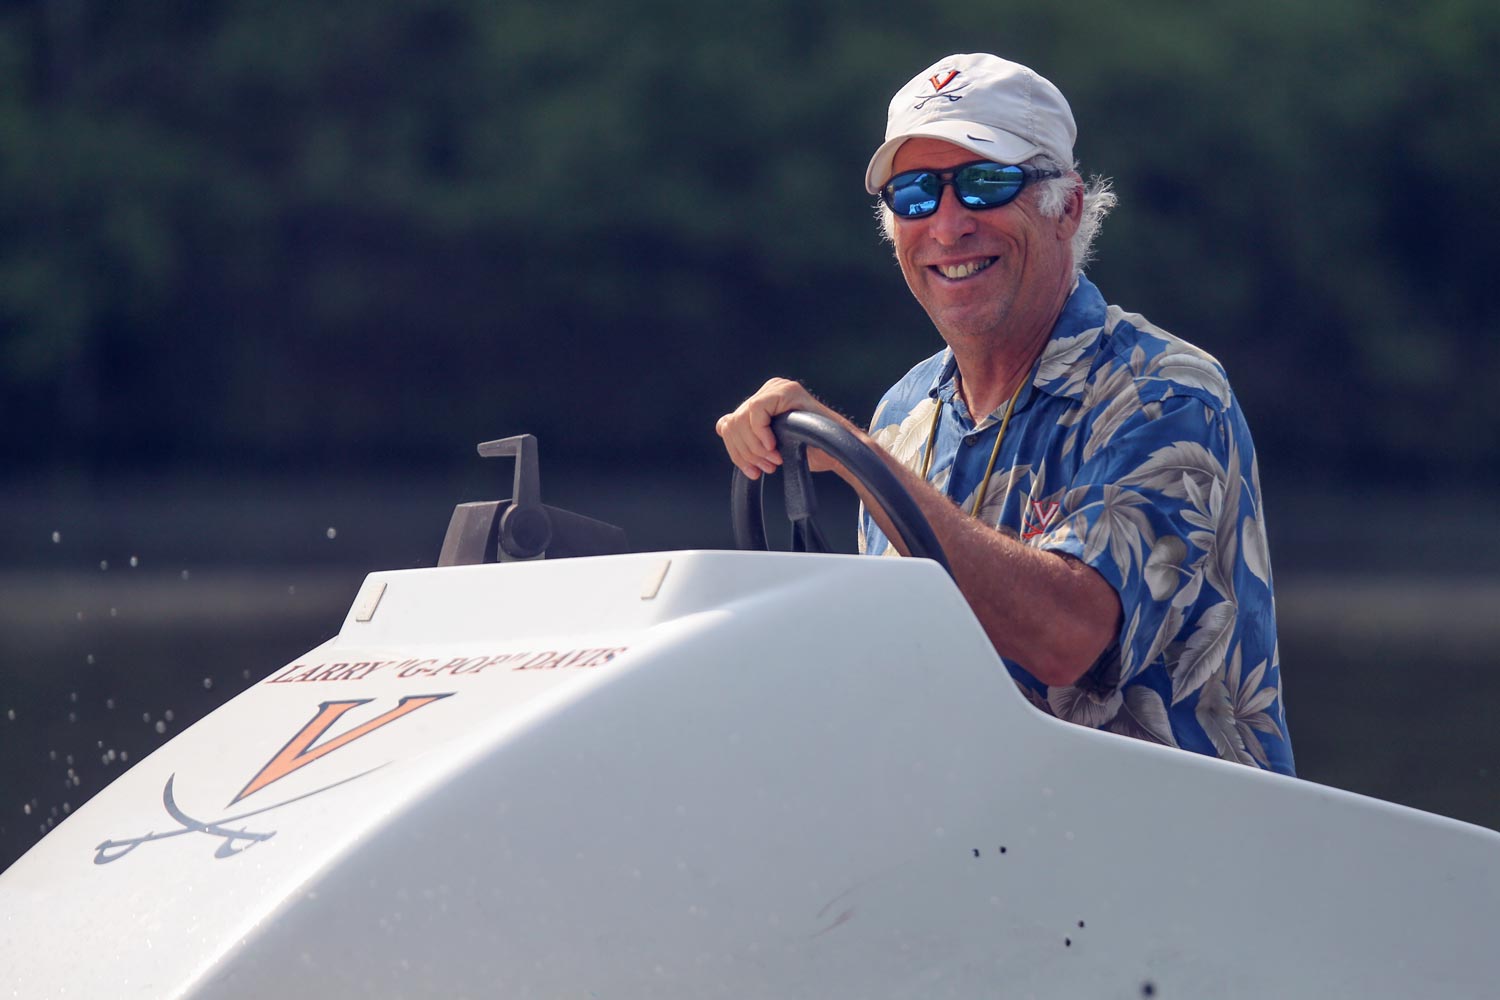 Roger Payne driving a boat